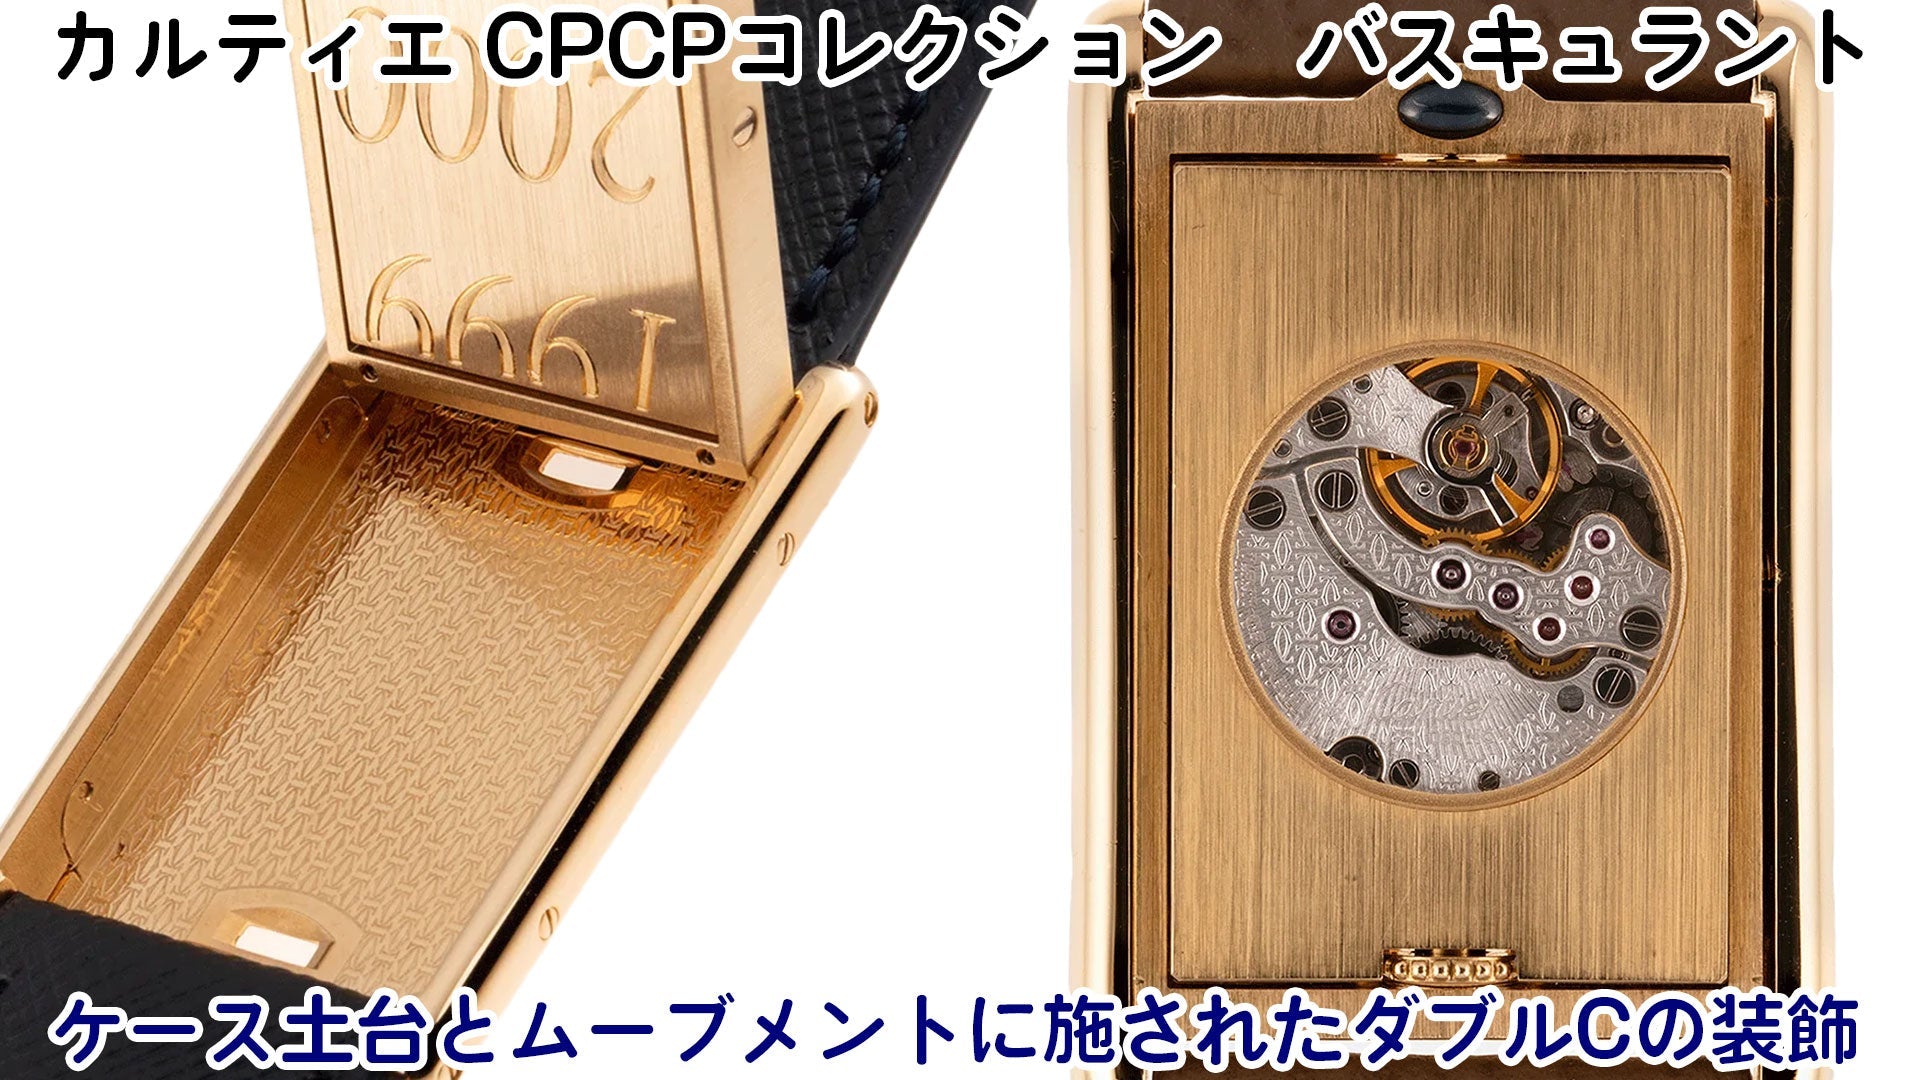 Cartier CPCP Collection Basculant Double C decoration on the case base and movement